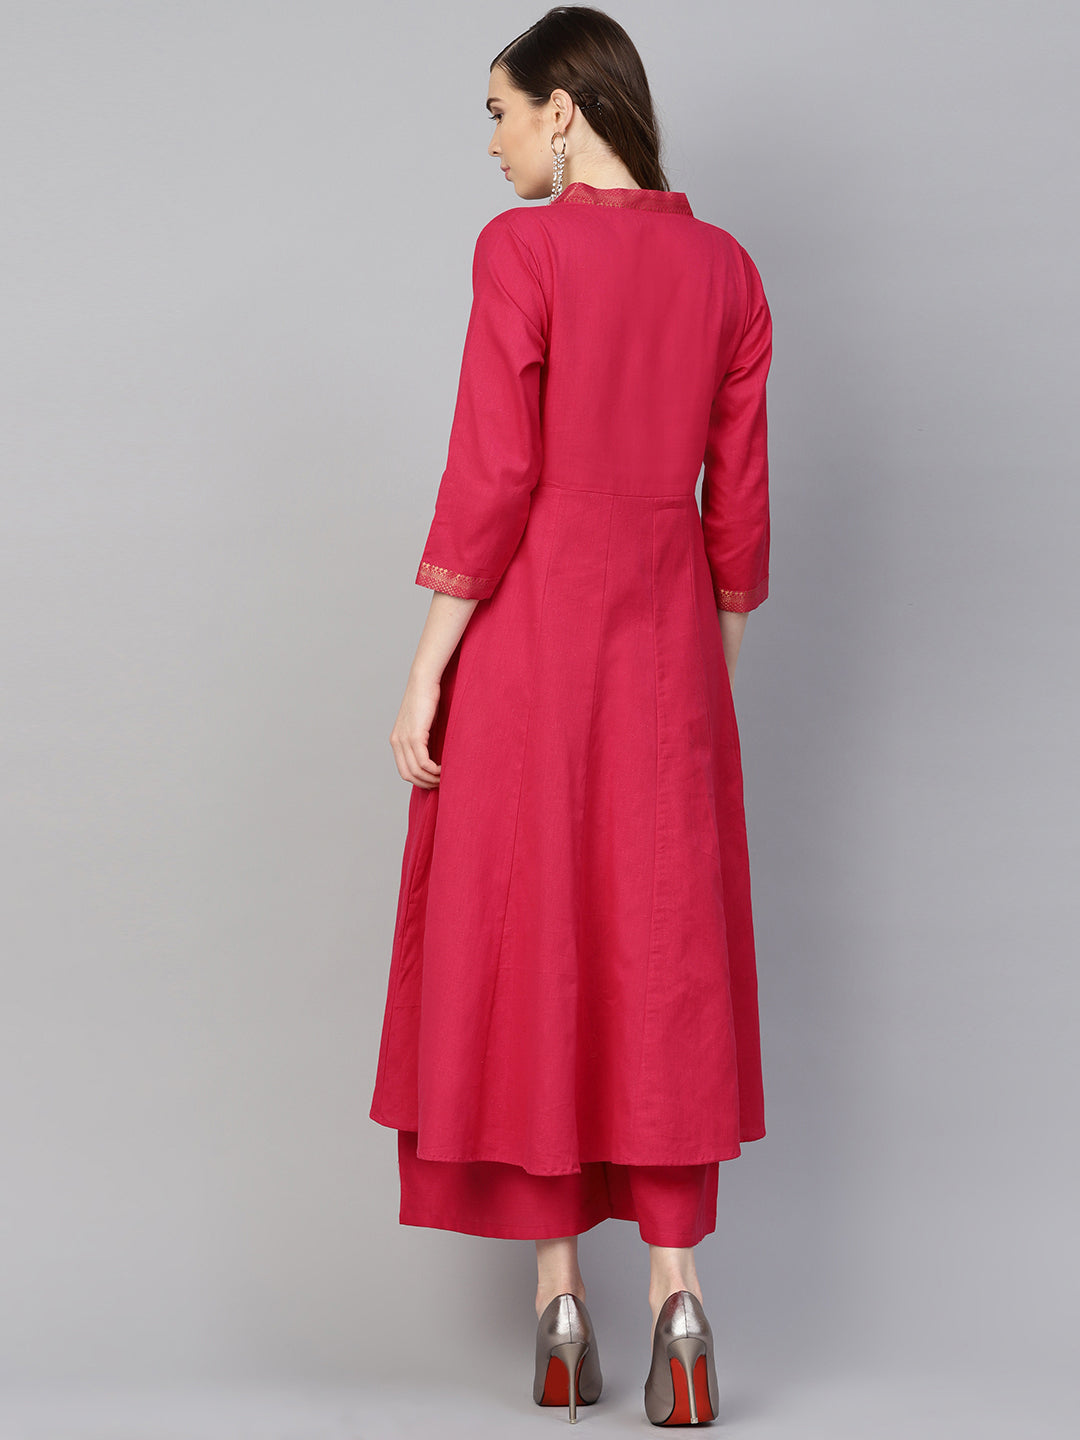 Women's Pink Solid Kurta With Palazzos - Bhama Couture